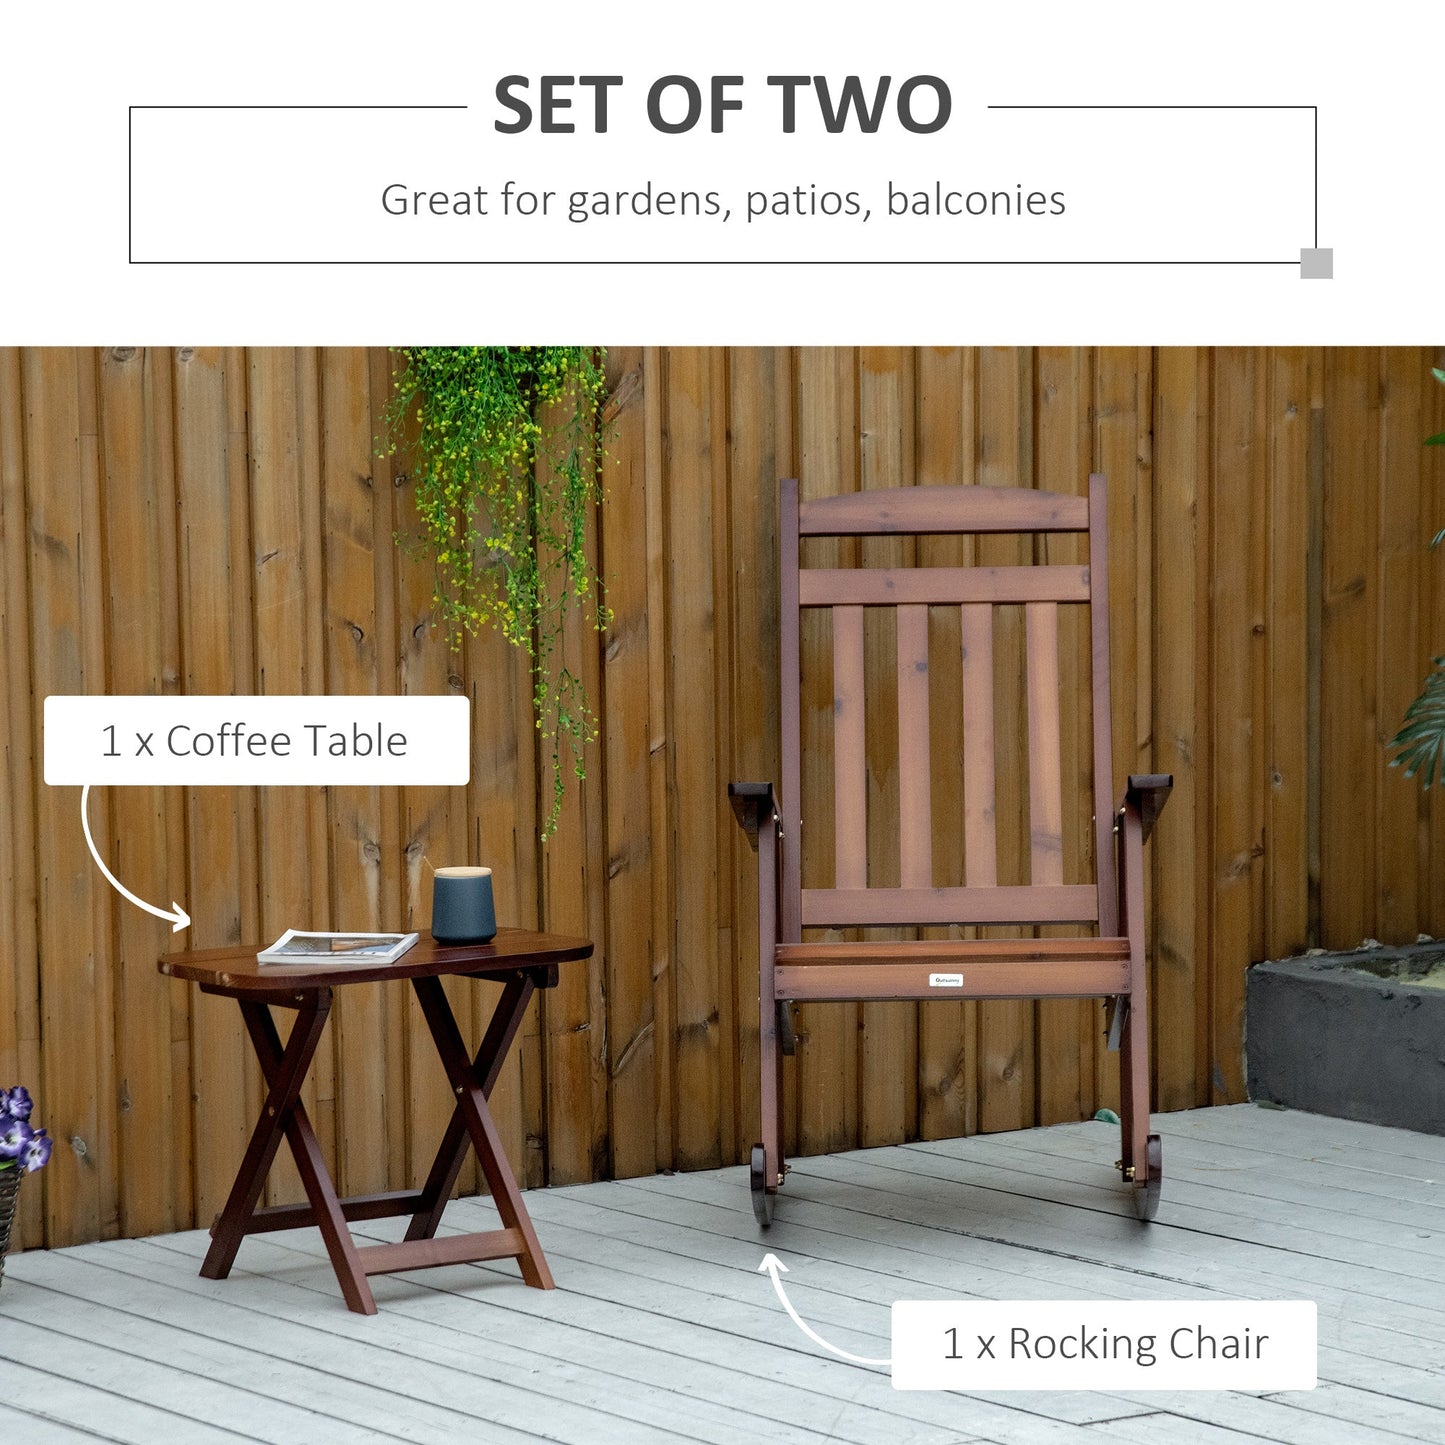 Outdoor and Garden-Wooden Outdoor Rocking Chair, 2-Piece Porch Rocker Set with Foldable Table for Patio, Backyard and Garden, Brown - Outdoor Style Company